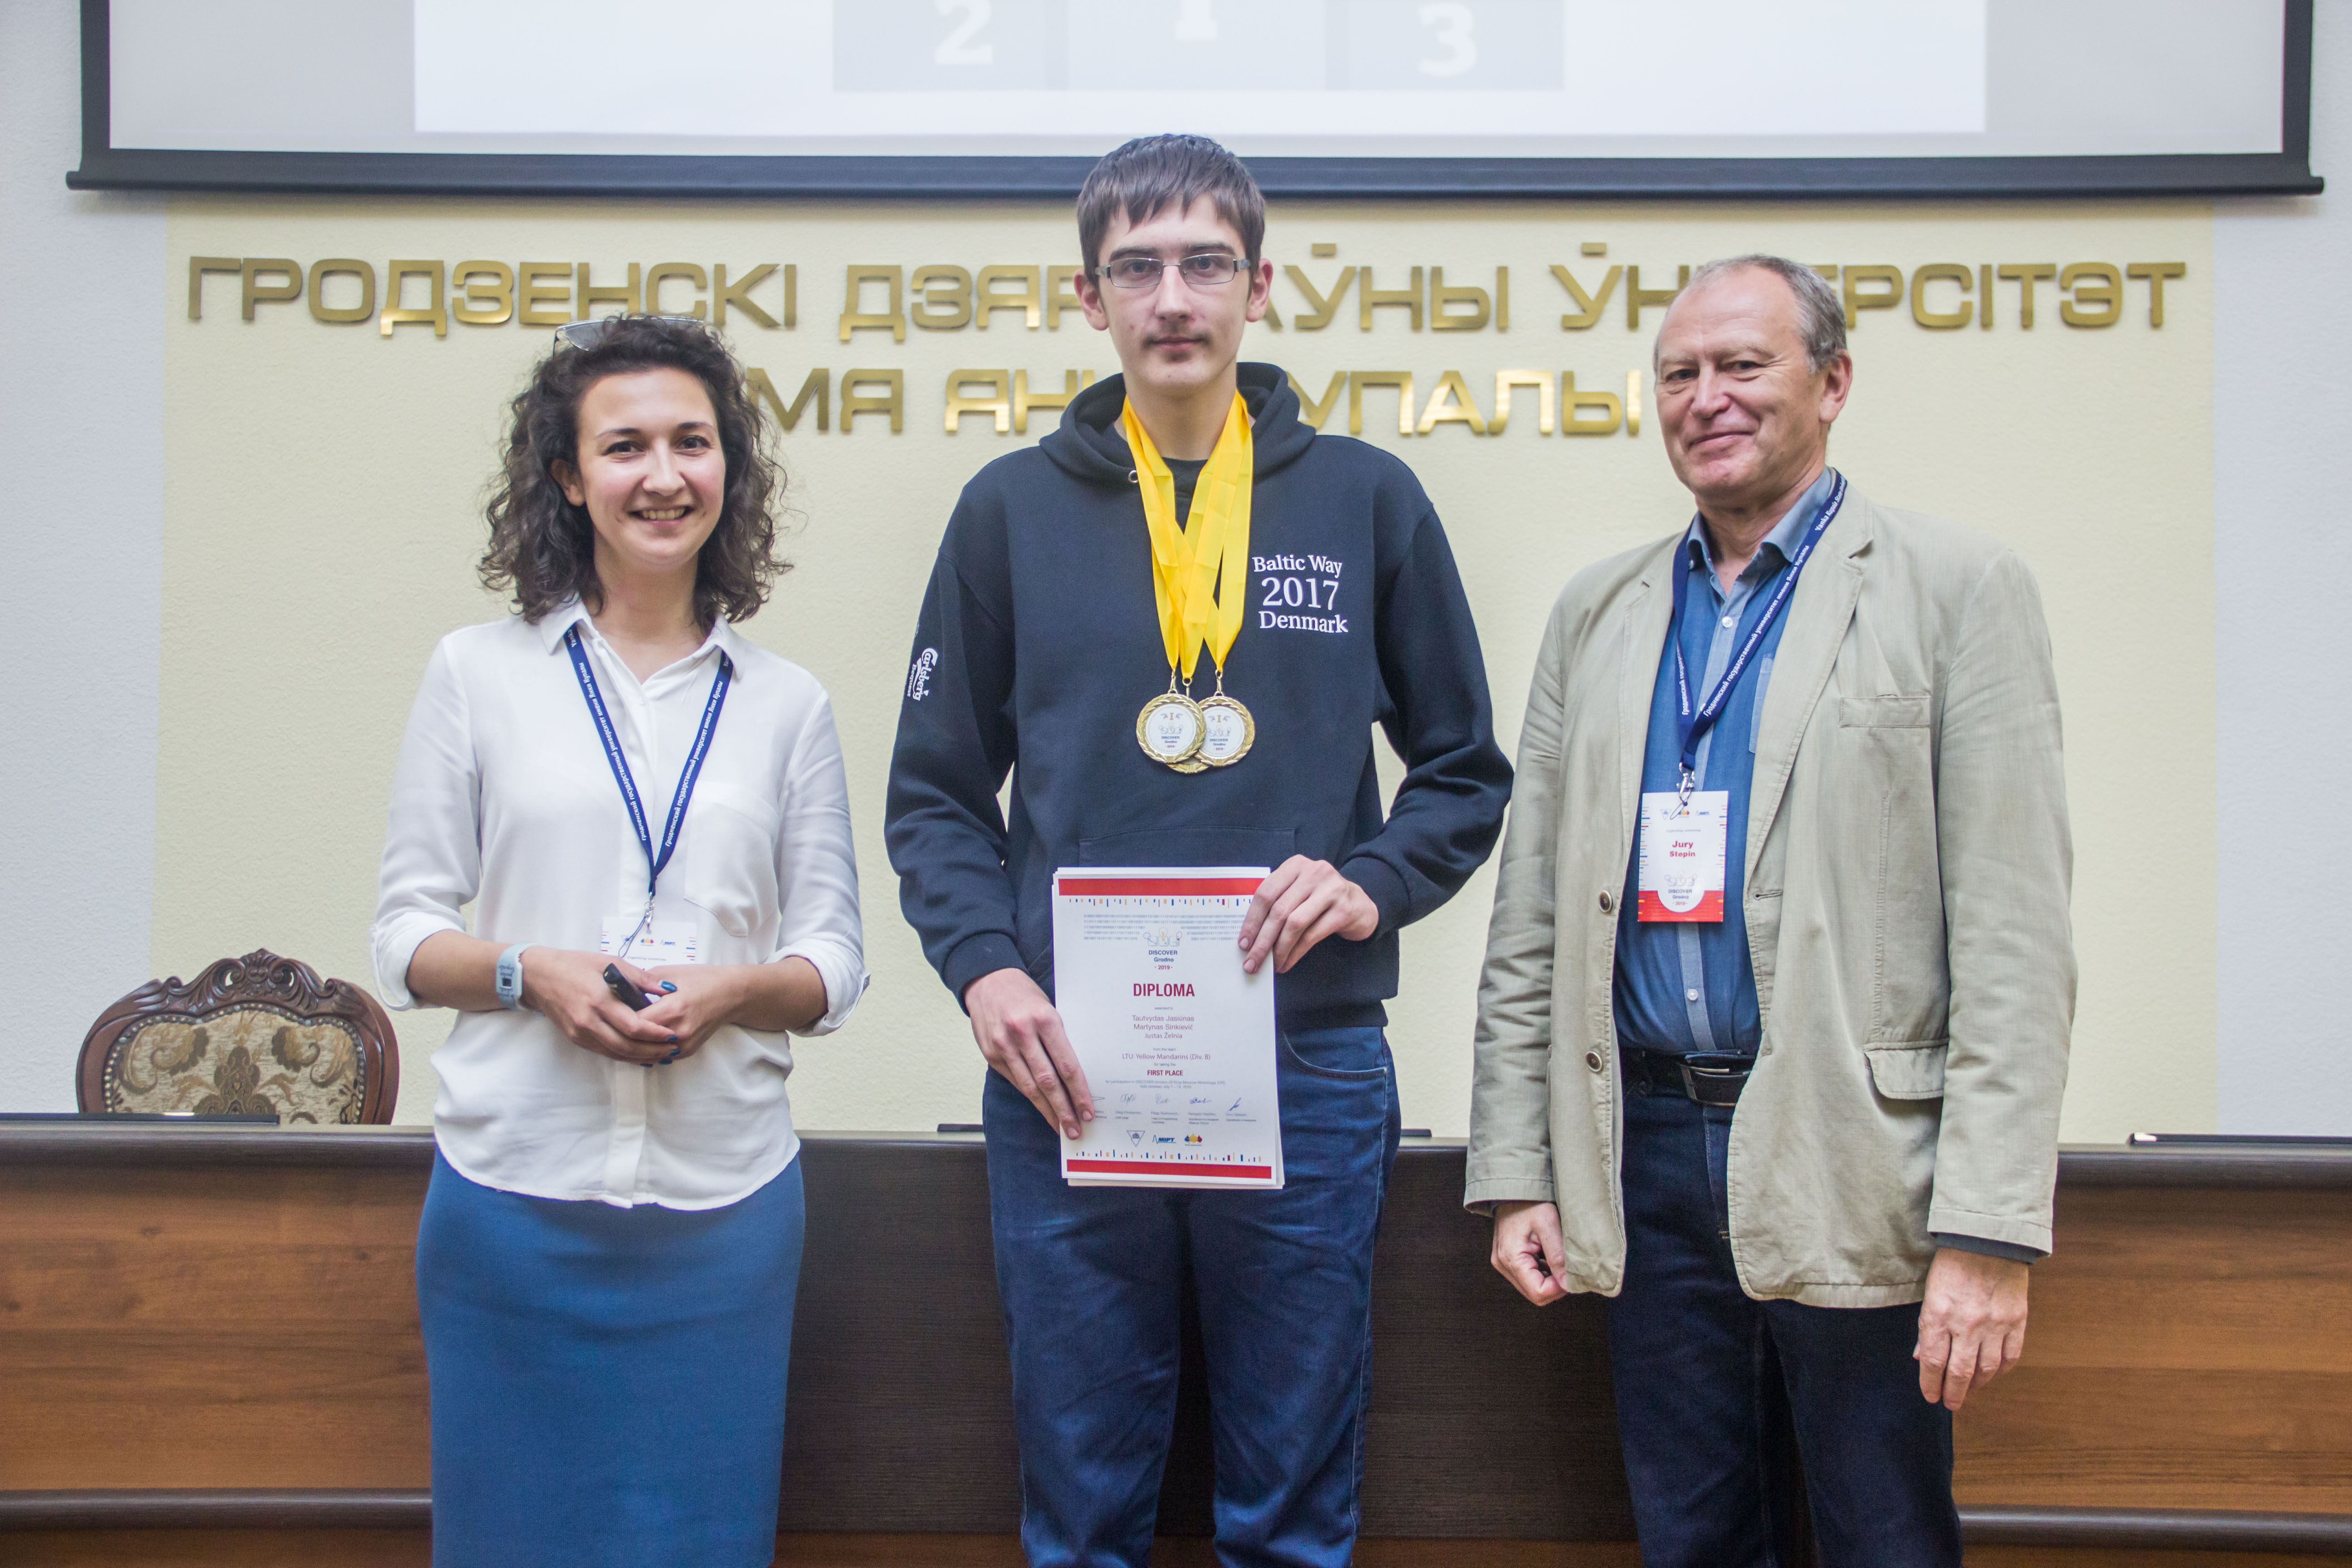 Winner Division B of Discover Grodno by Moscow Workshops ICPC 2019. LTU: Yellow Mandarins (Jasiunas, Zelnia, Sinkievic), Lithuania